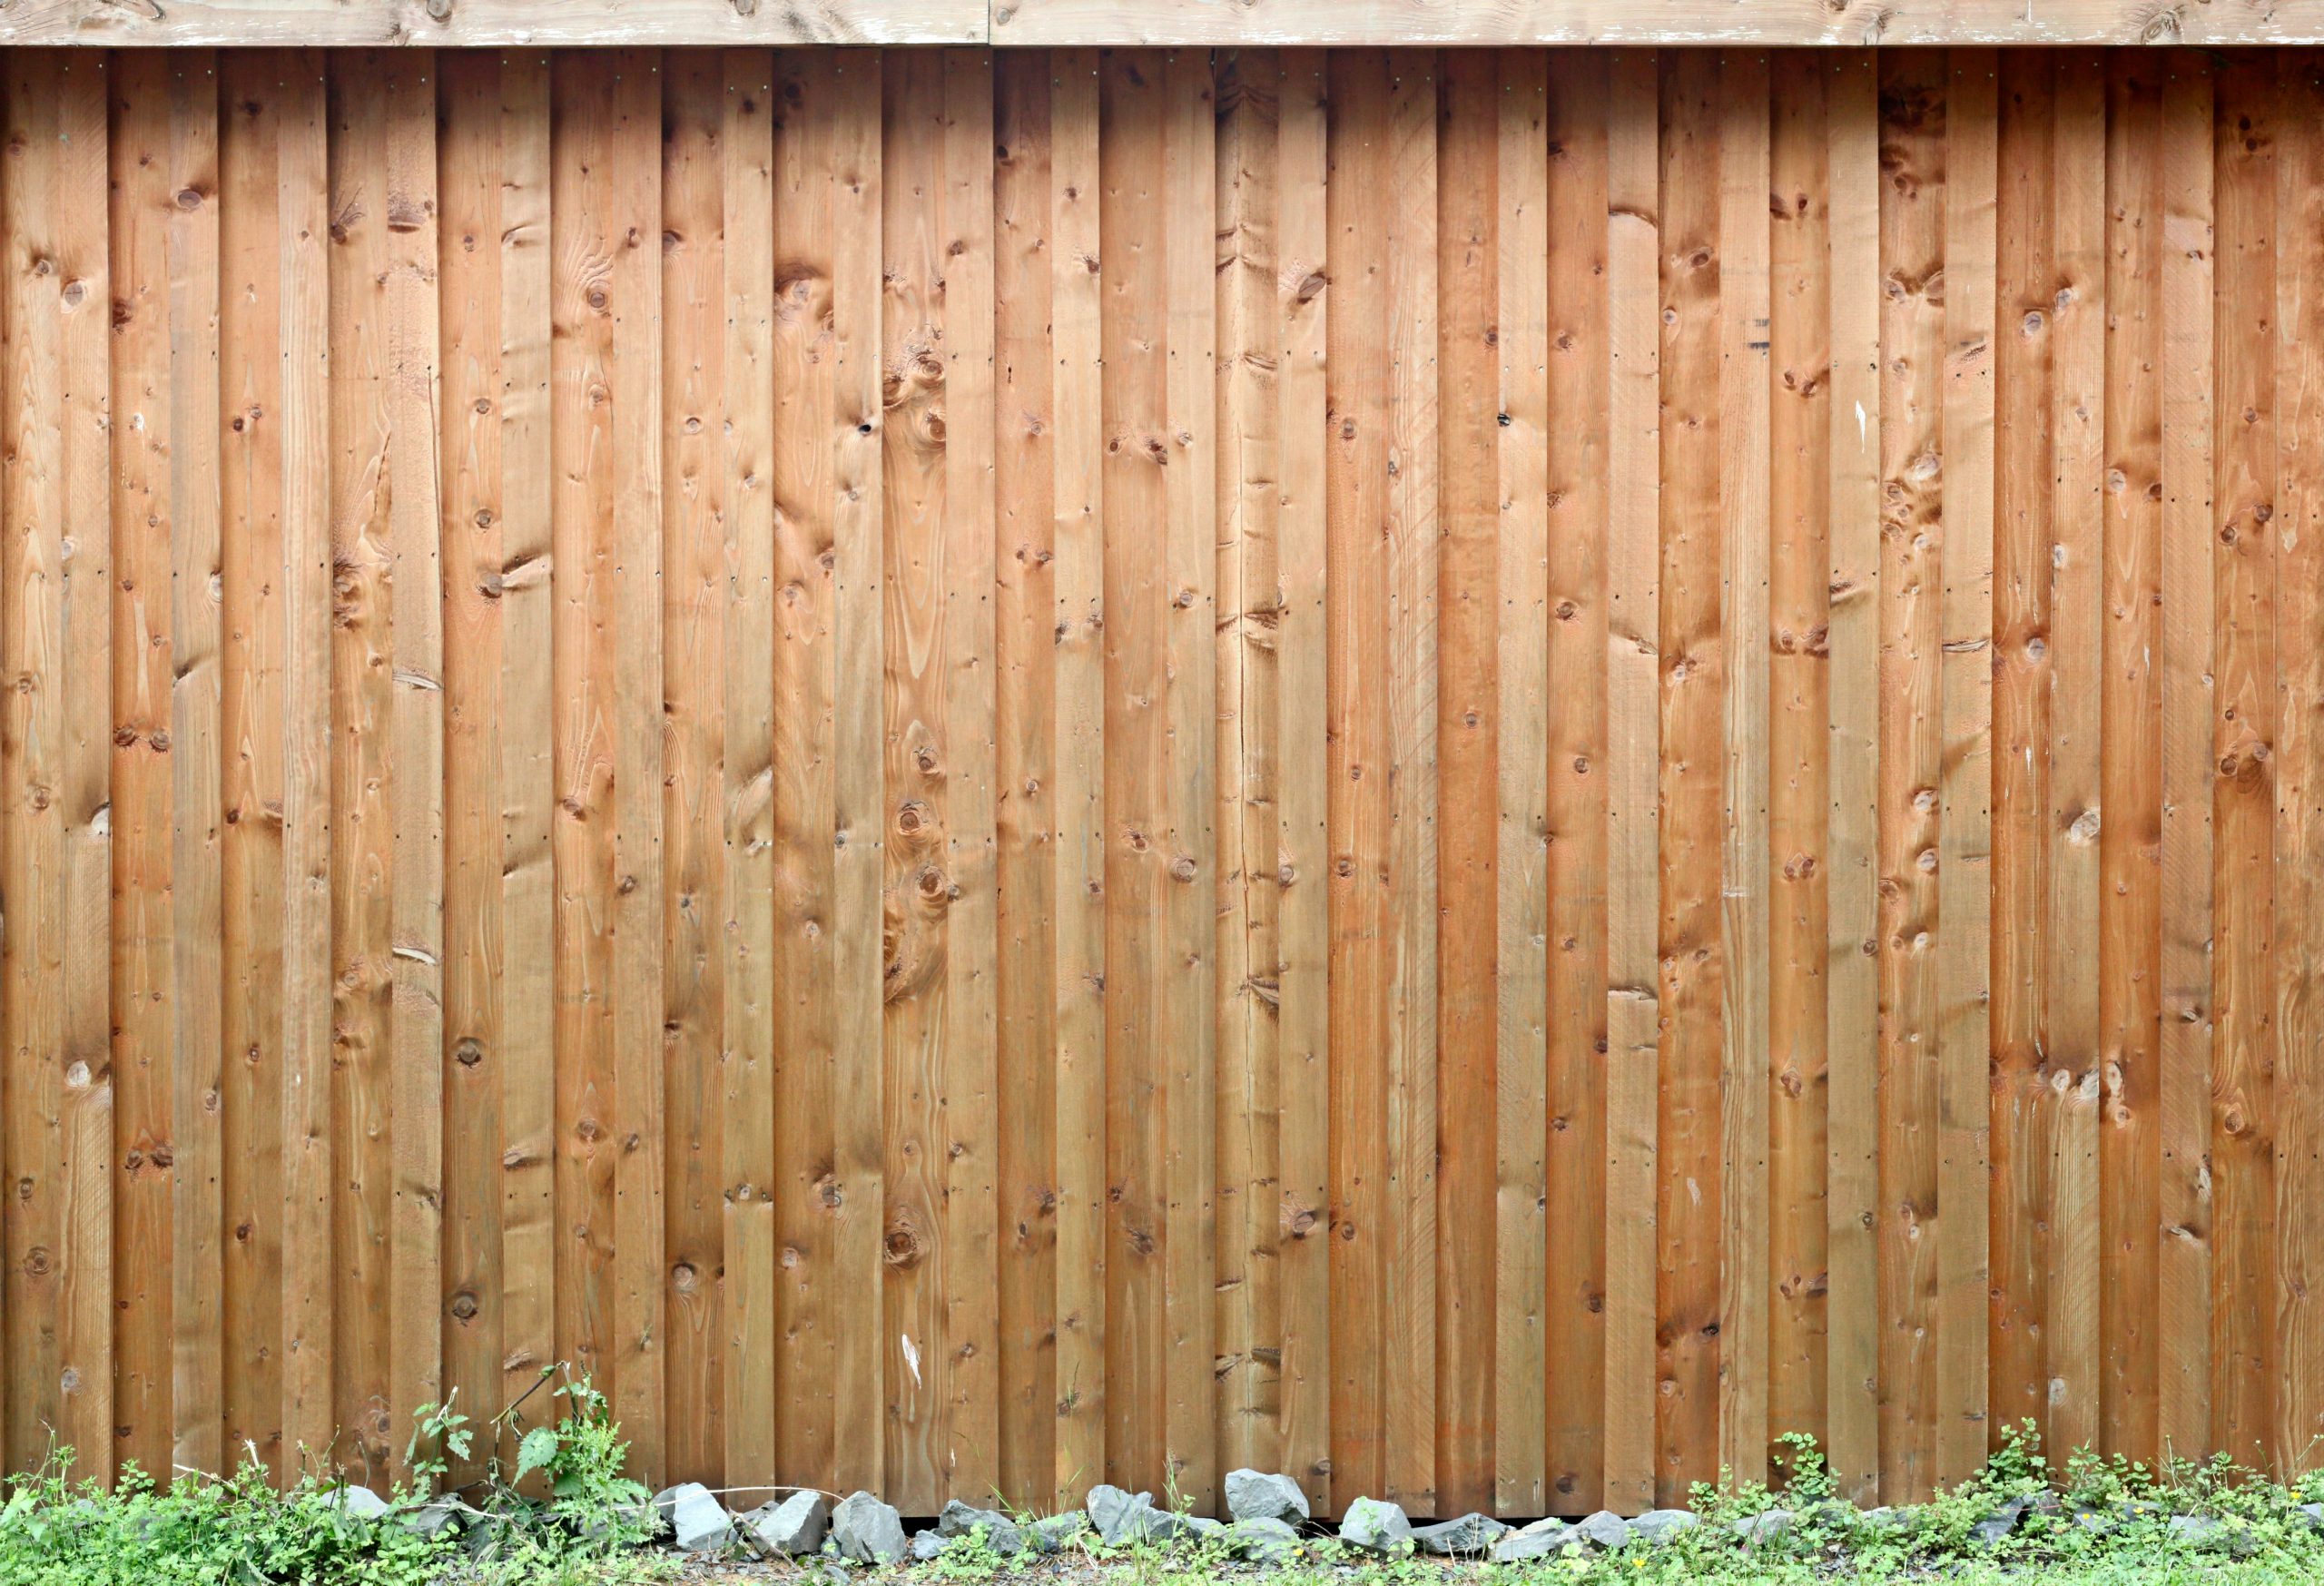 wooden fence, fence installation process, fence posts, fence requires